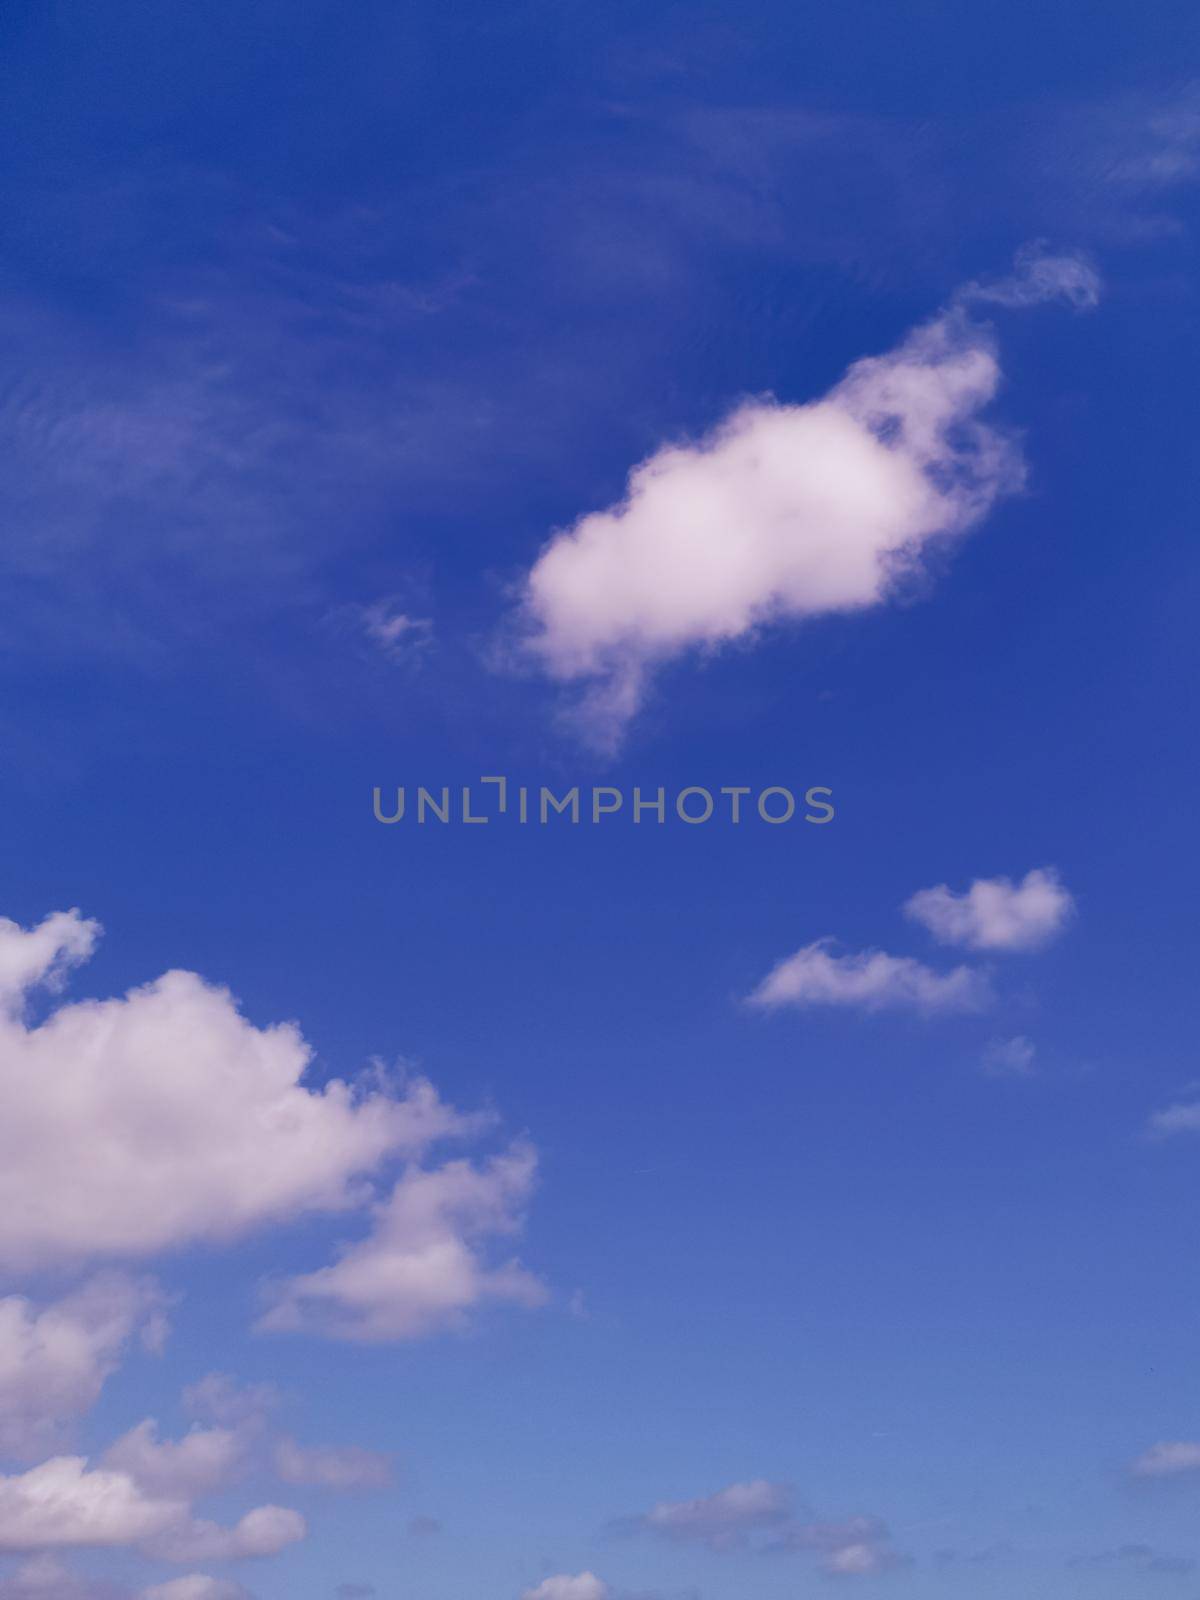 Vertical shot of a blue cloudy sky on a sunny day - great for wallpapers